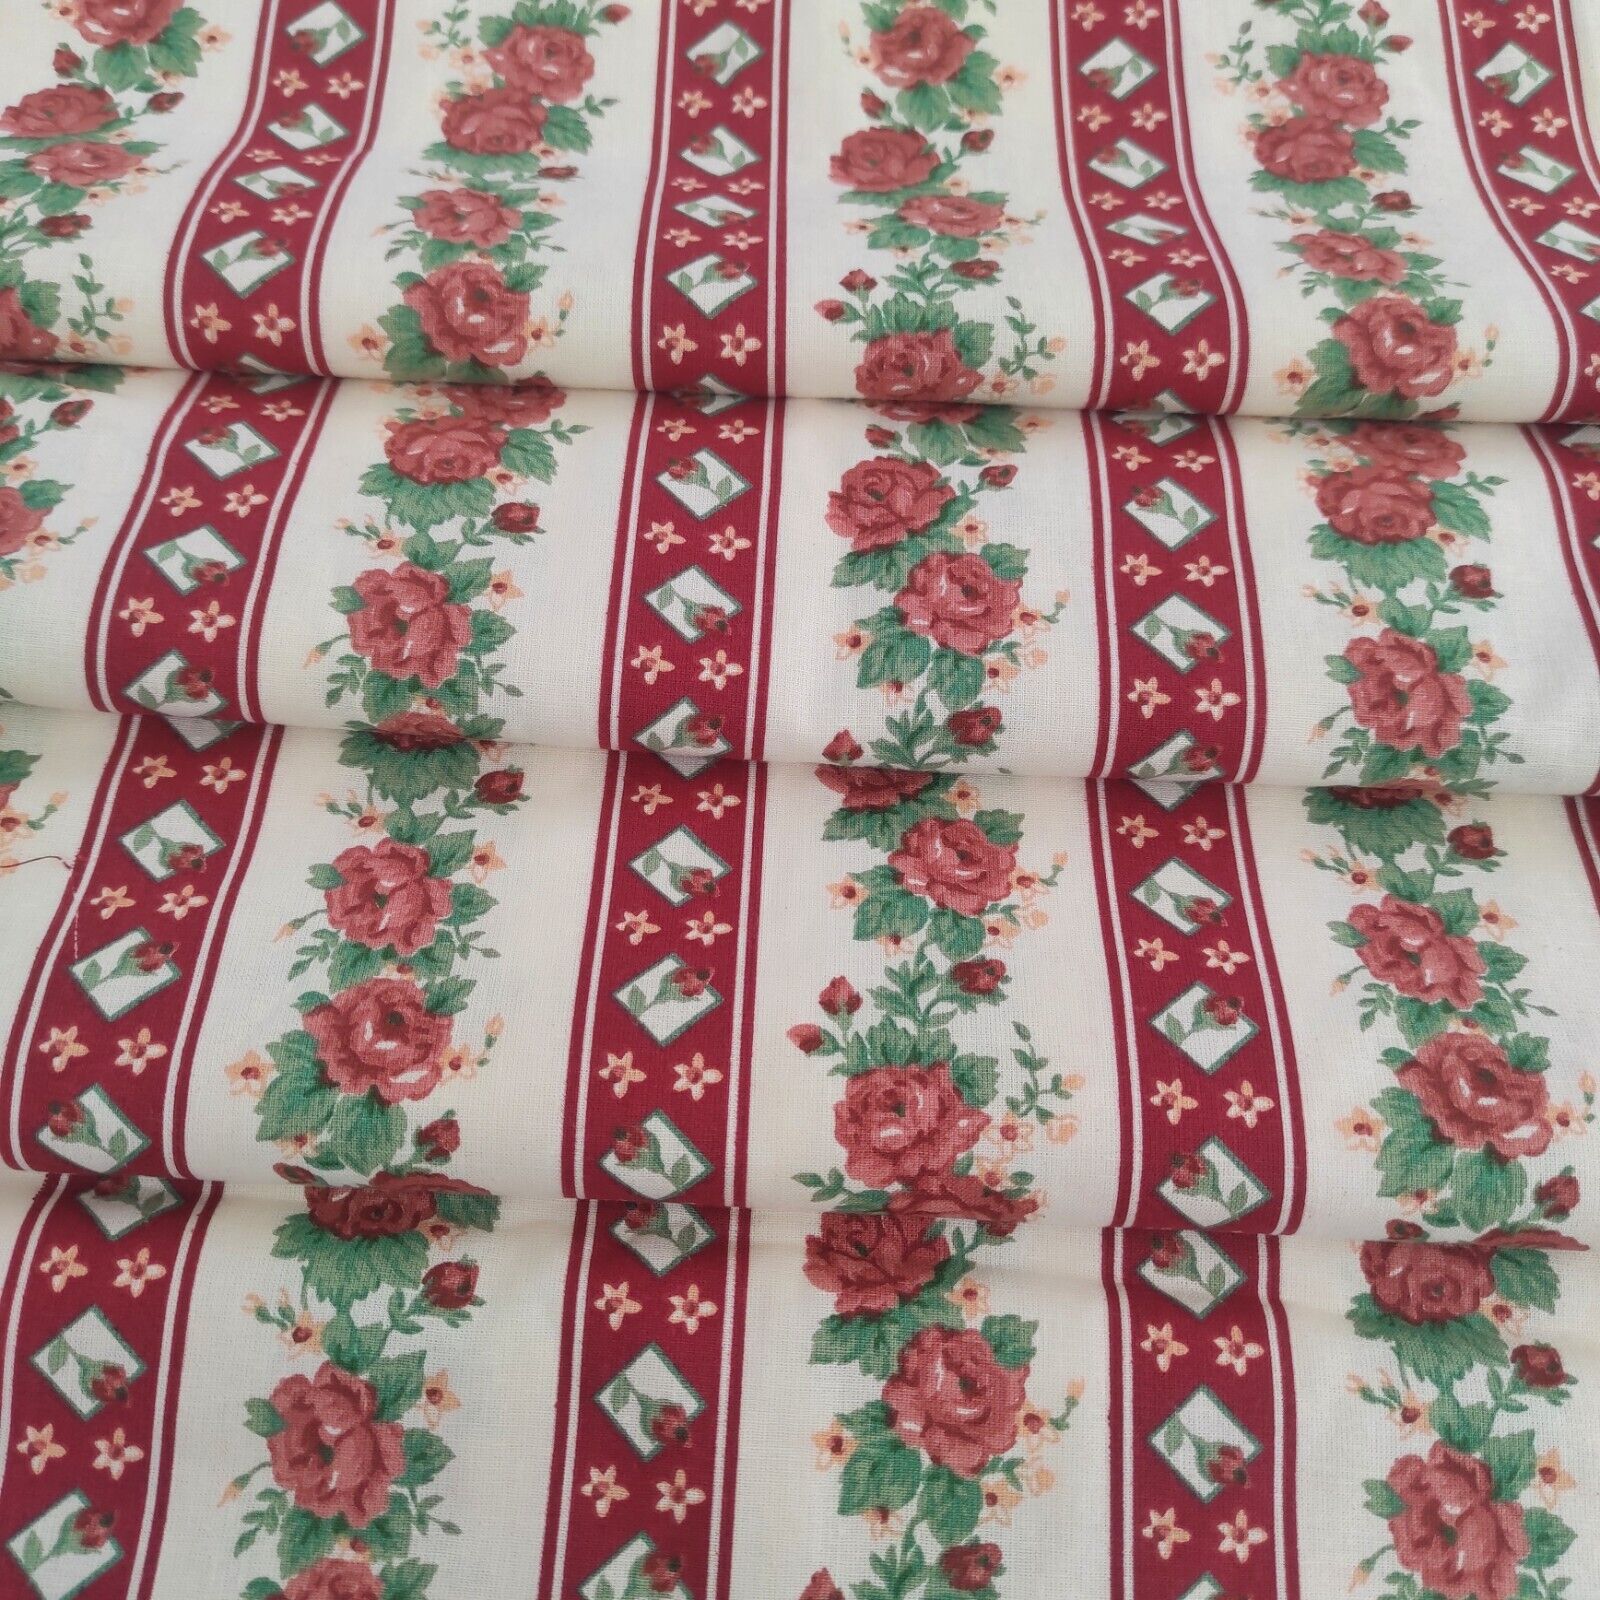 Vintage green red striped roses cotton floral fabric Sewing Quilting and Craft